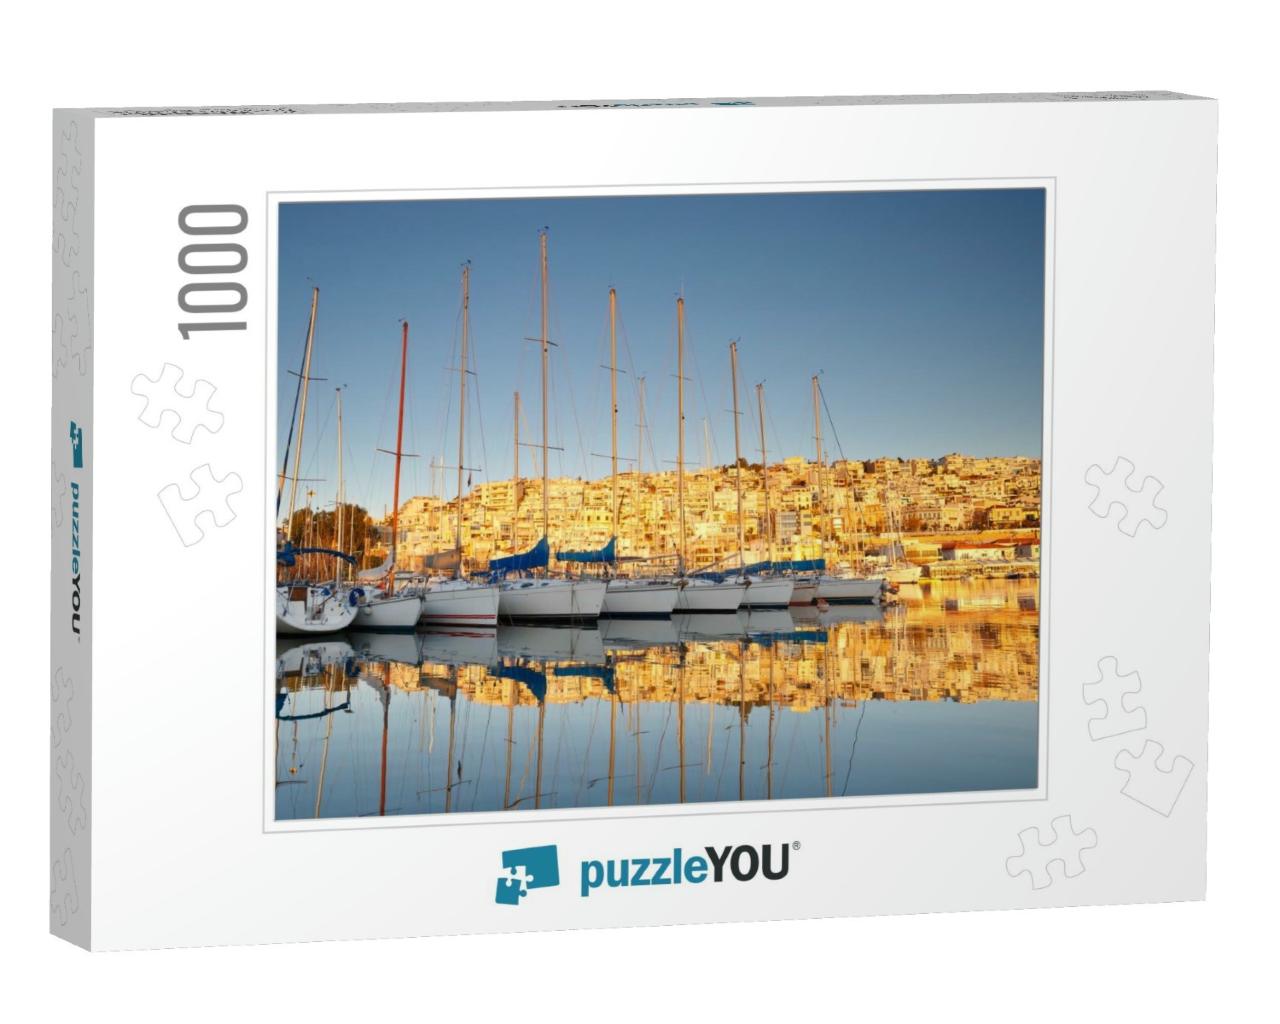 Morning in Mikrolimano Marina in Athens, Greece... Jigsaw Puzzle with 1000 pieces